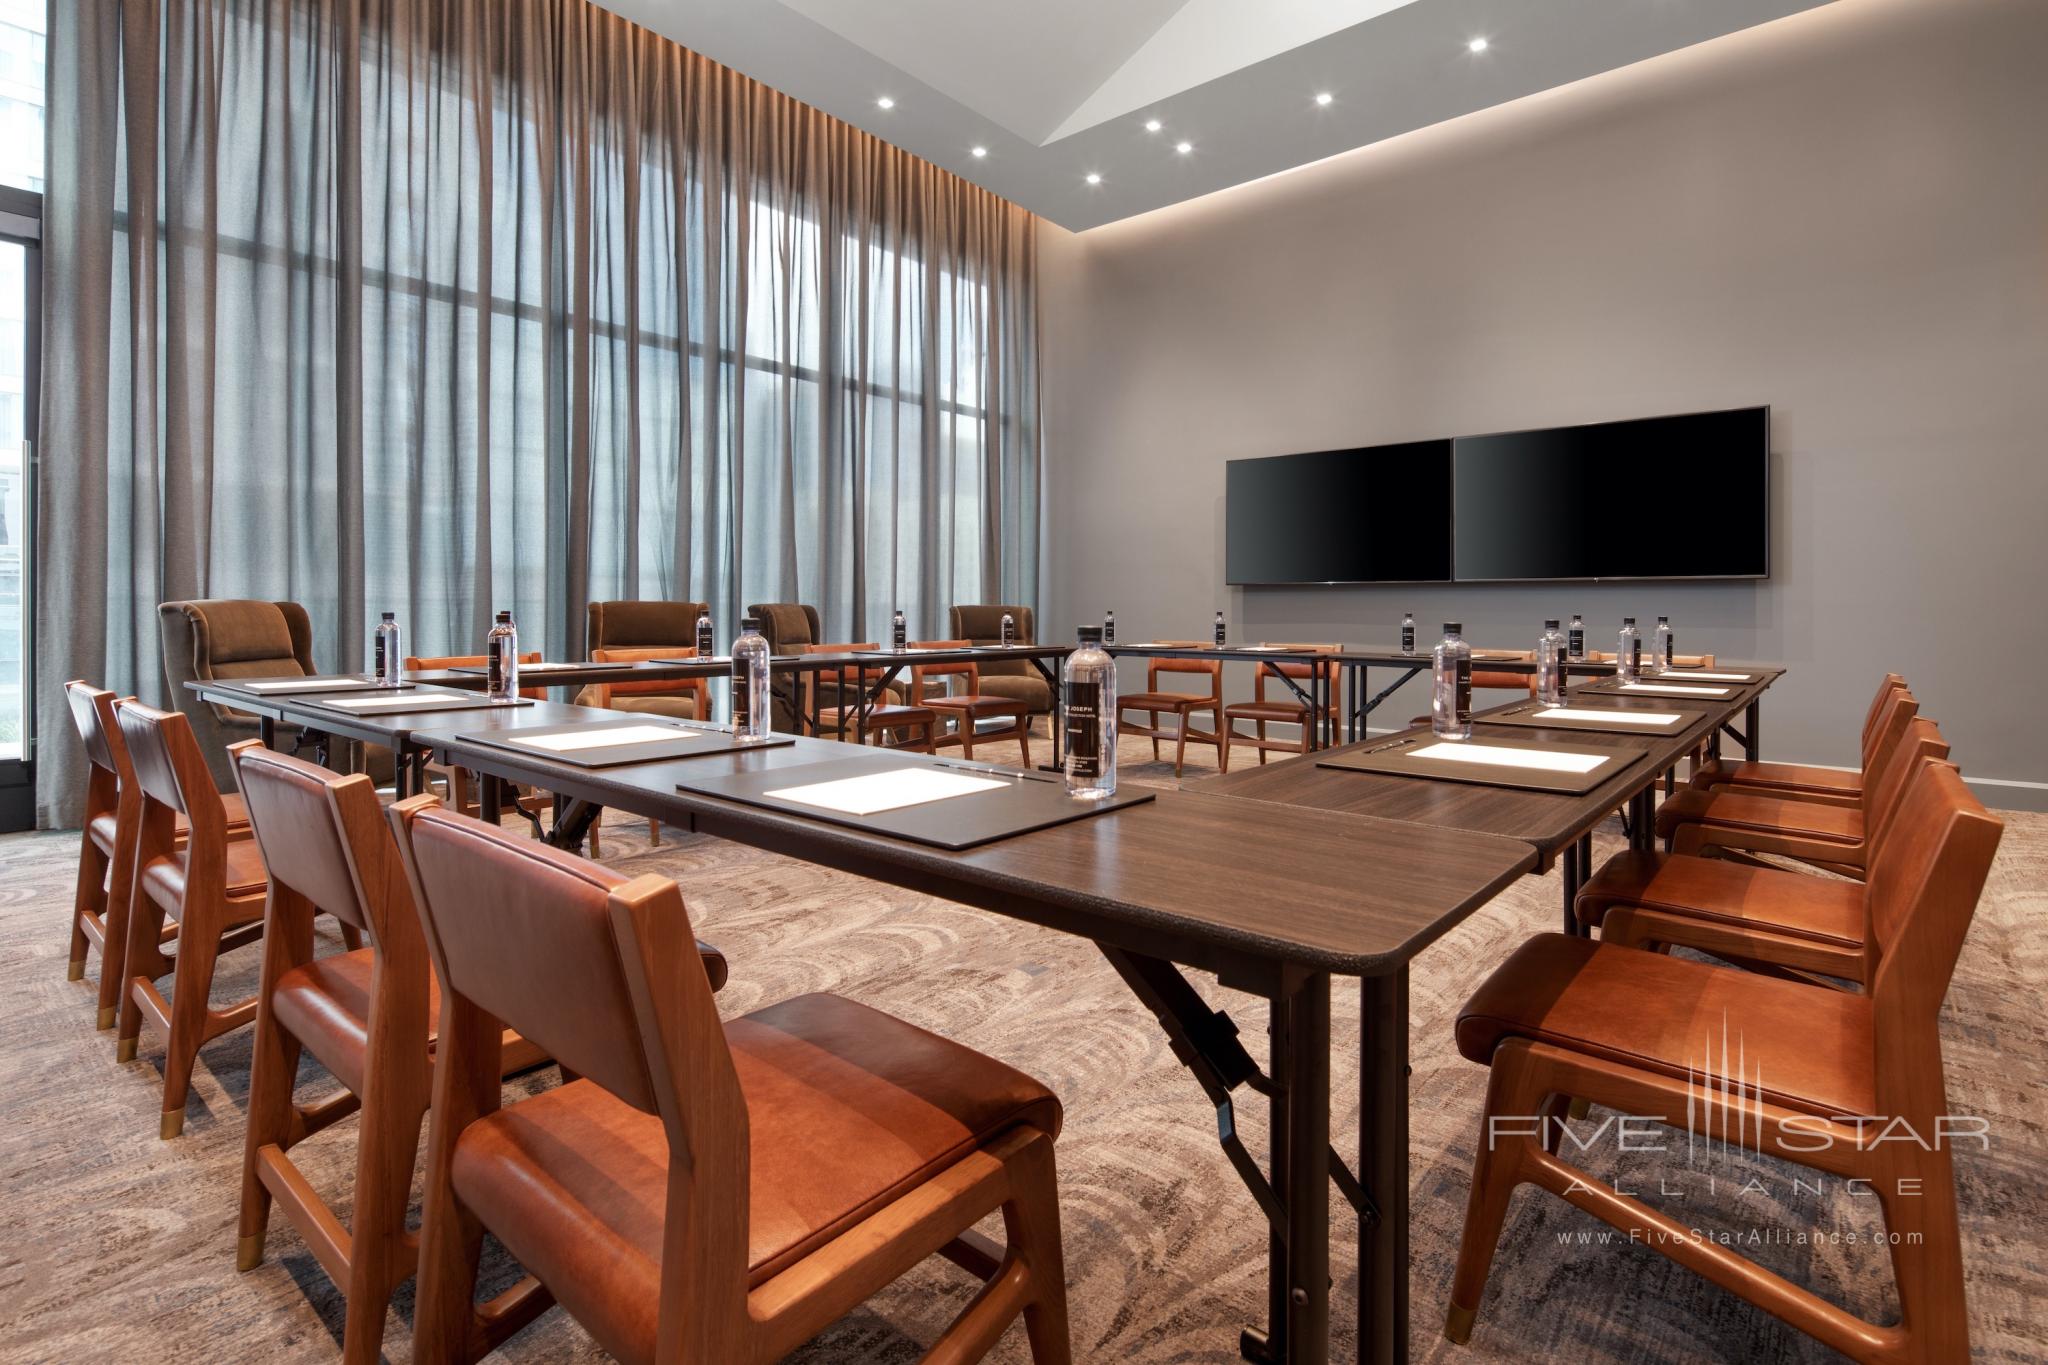 The Joseph Hotel in Nashville features more than 22,000 square feet of meeting and event space from intimate boardroom settings to an expansive 6,000-square-foot ballroom.